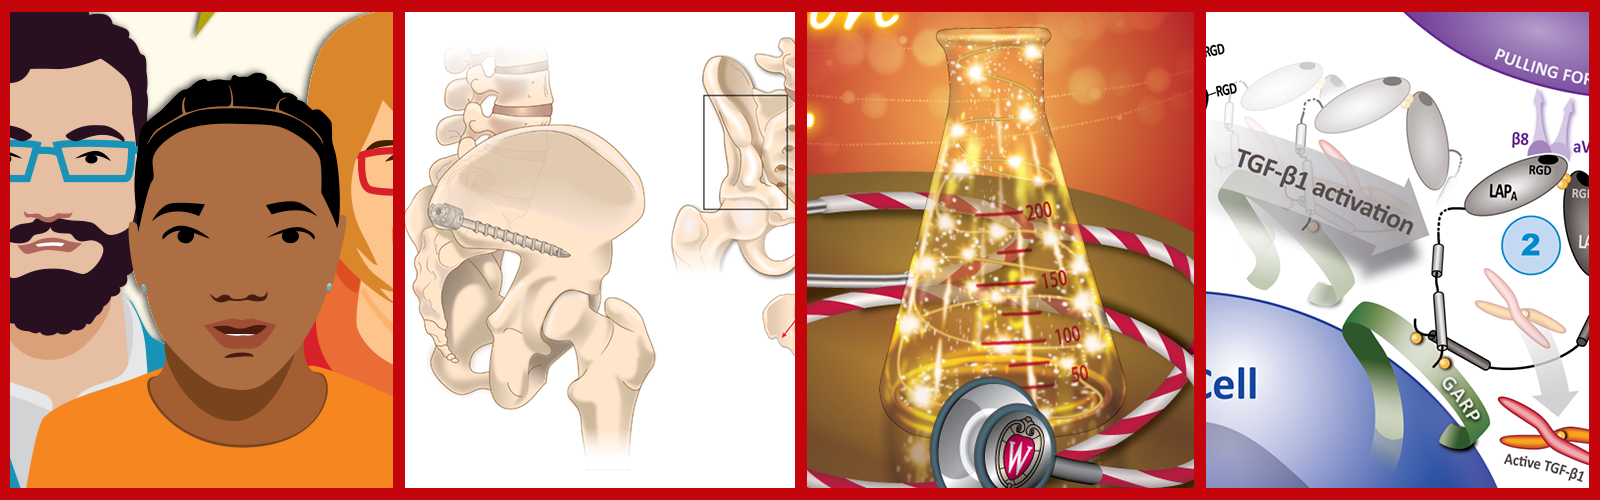 Illustration variety from left to right: graphic stylized illustration of diverse faces, medical illustration of bones and screw, illustration of a beaker with lights in side it and stethoscope around it, scientific illustration of cells and arrows indicating transformation